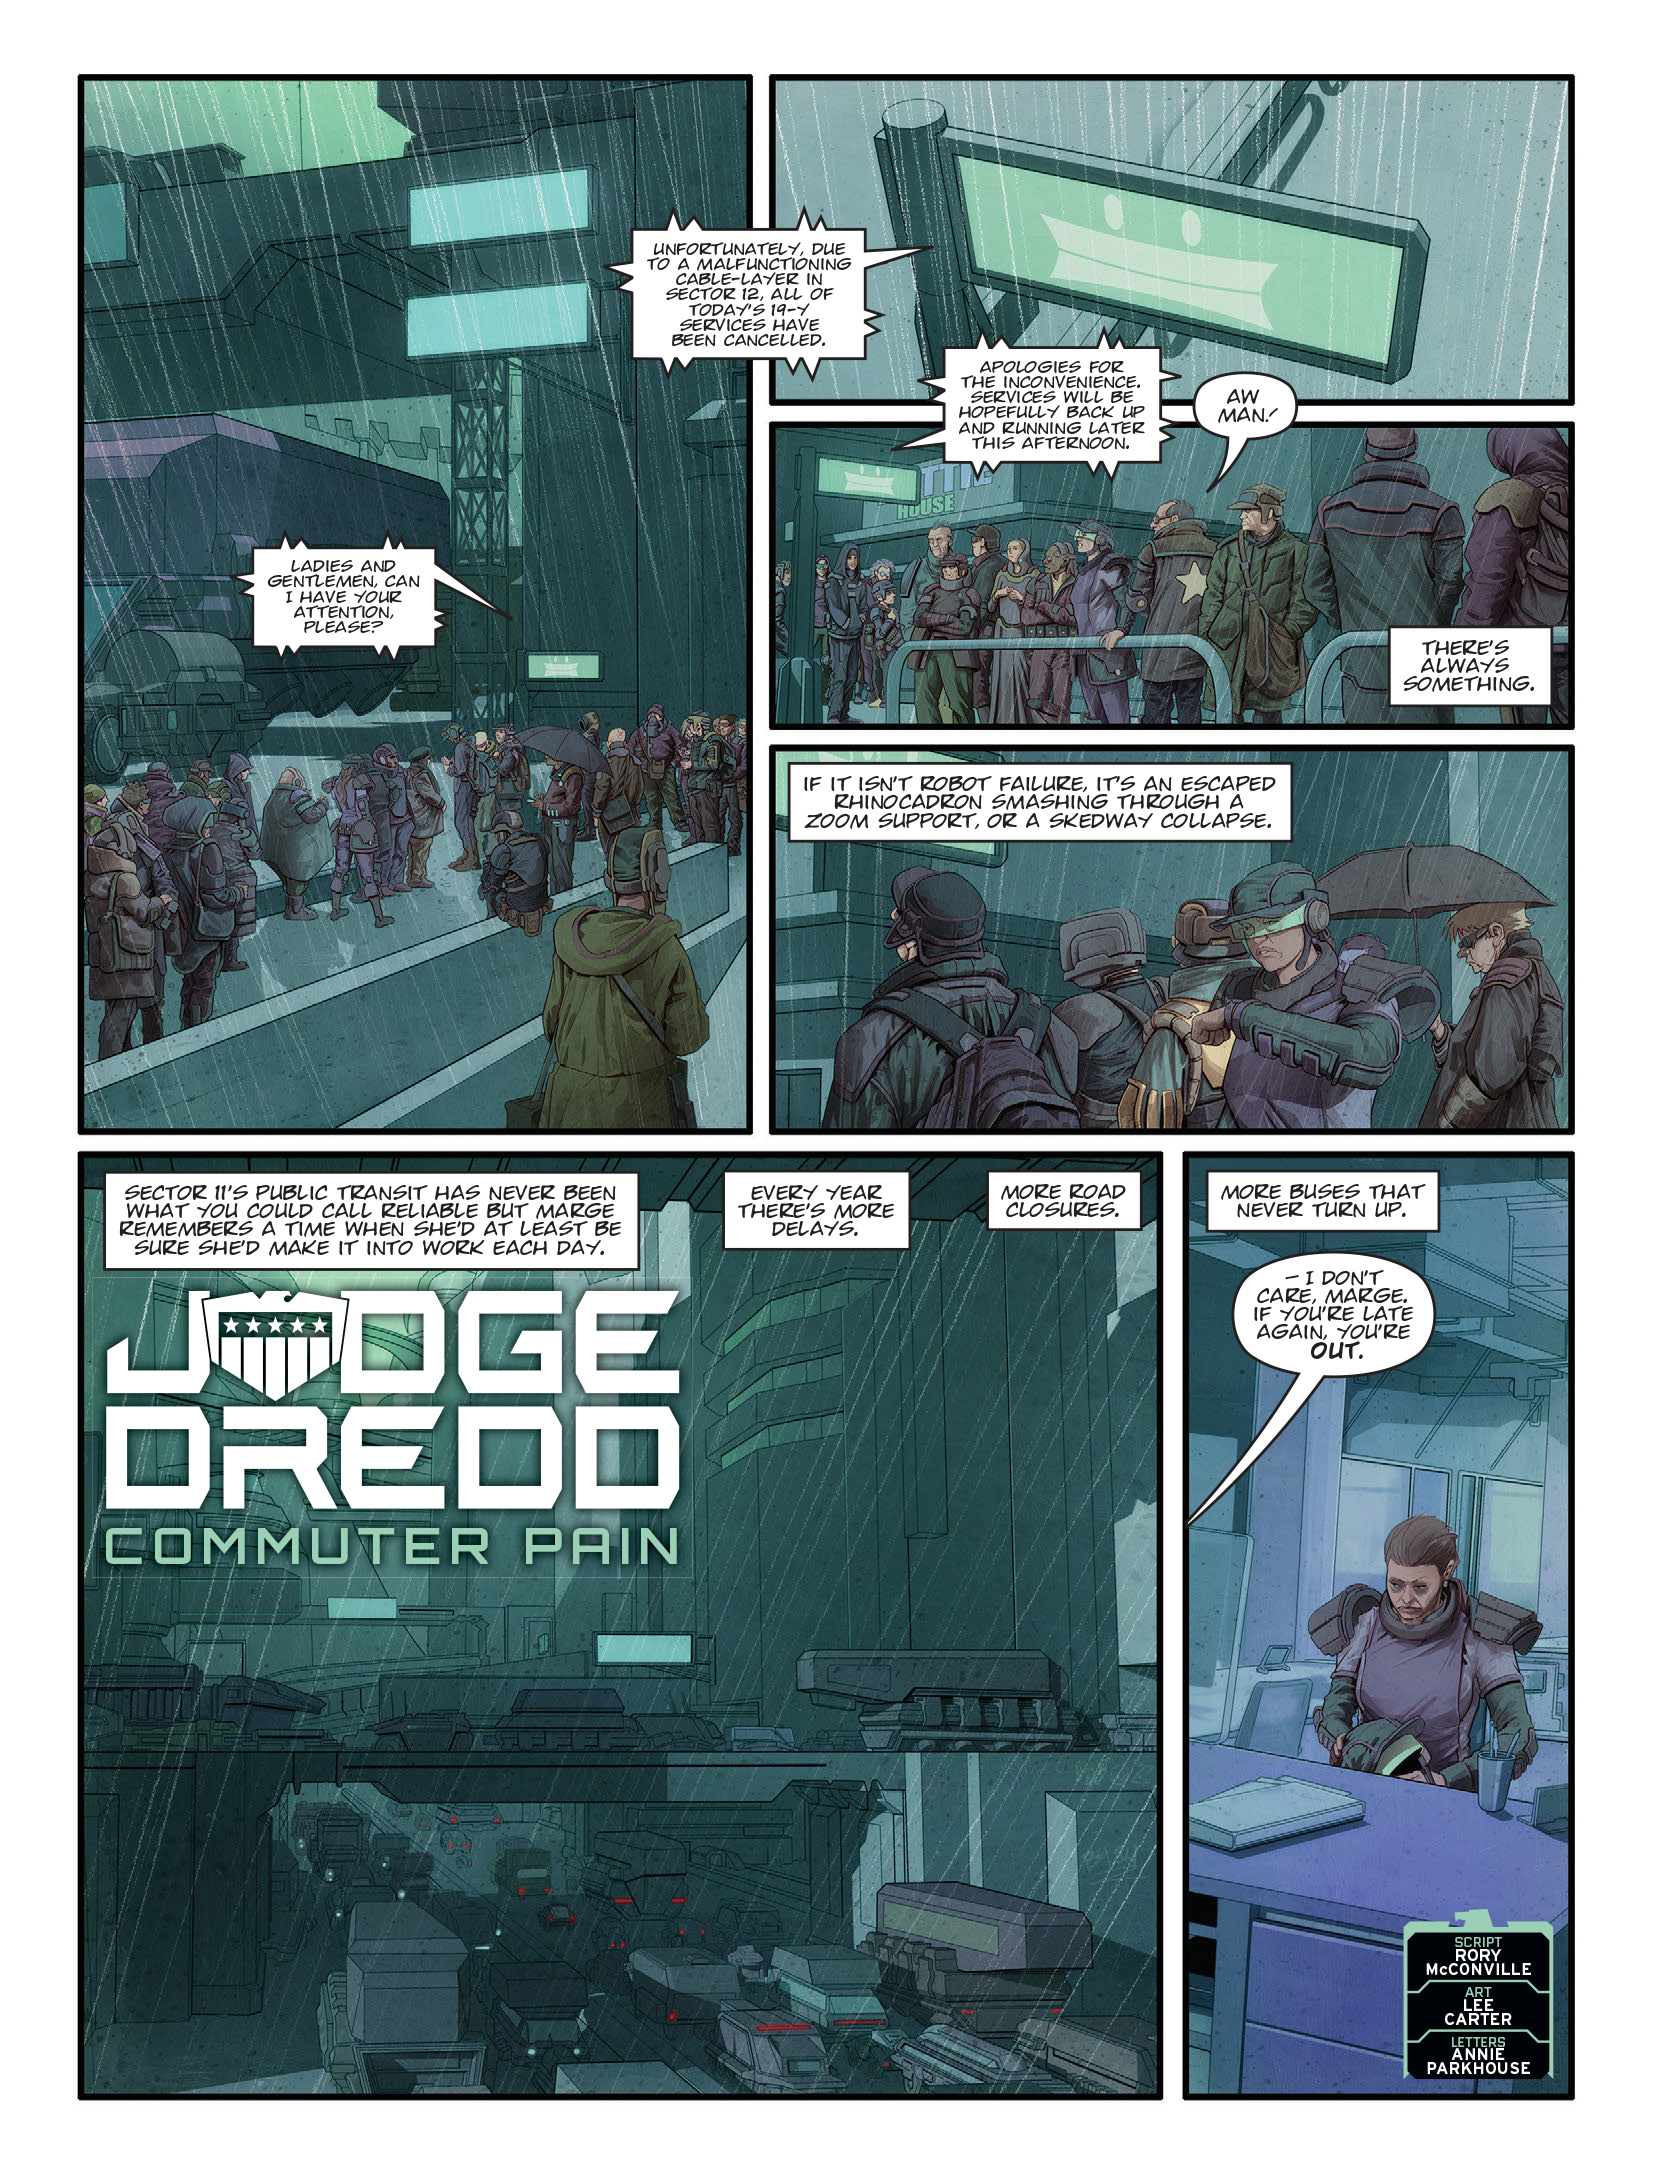 2000 AD: Chapter 2090 - Page 3